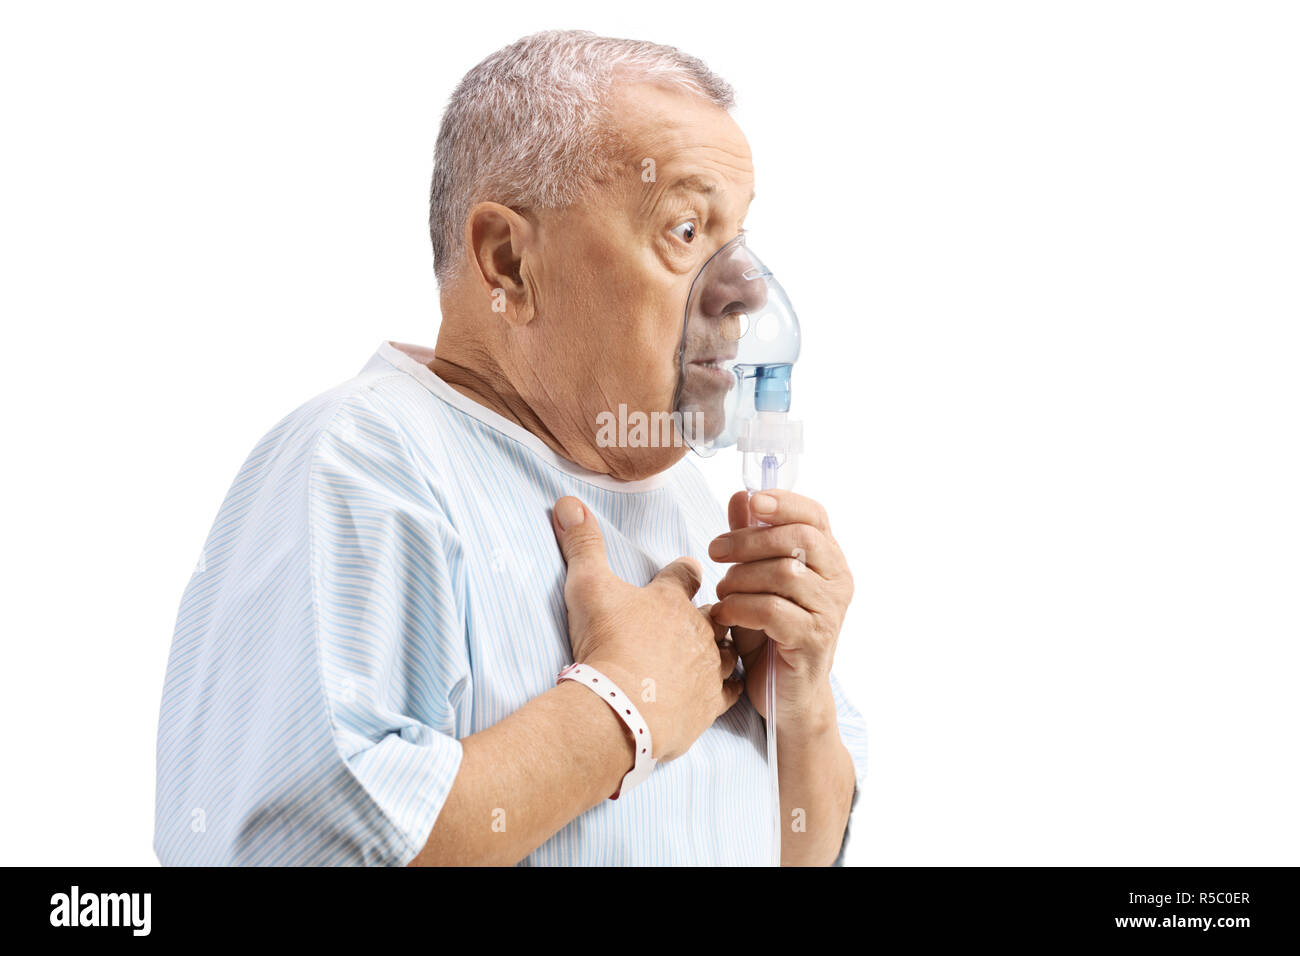 Elderly patient using an inhalation mask isolated on white background Stock Photo